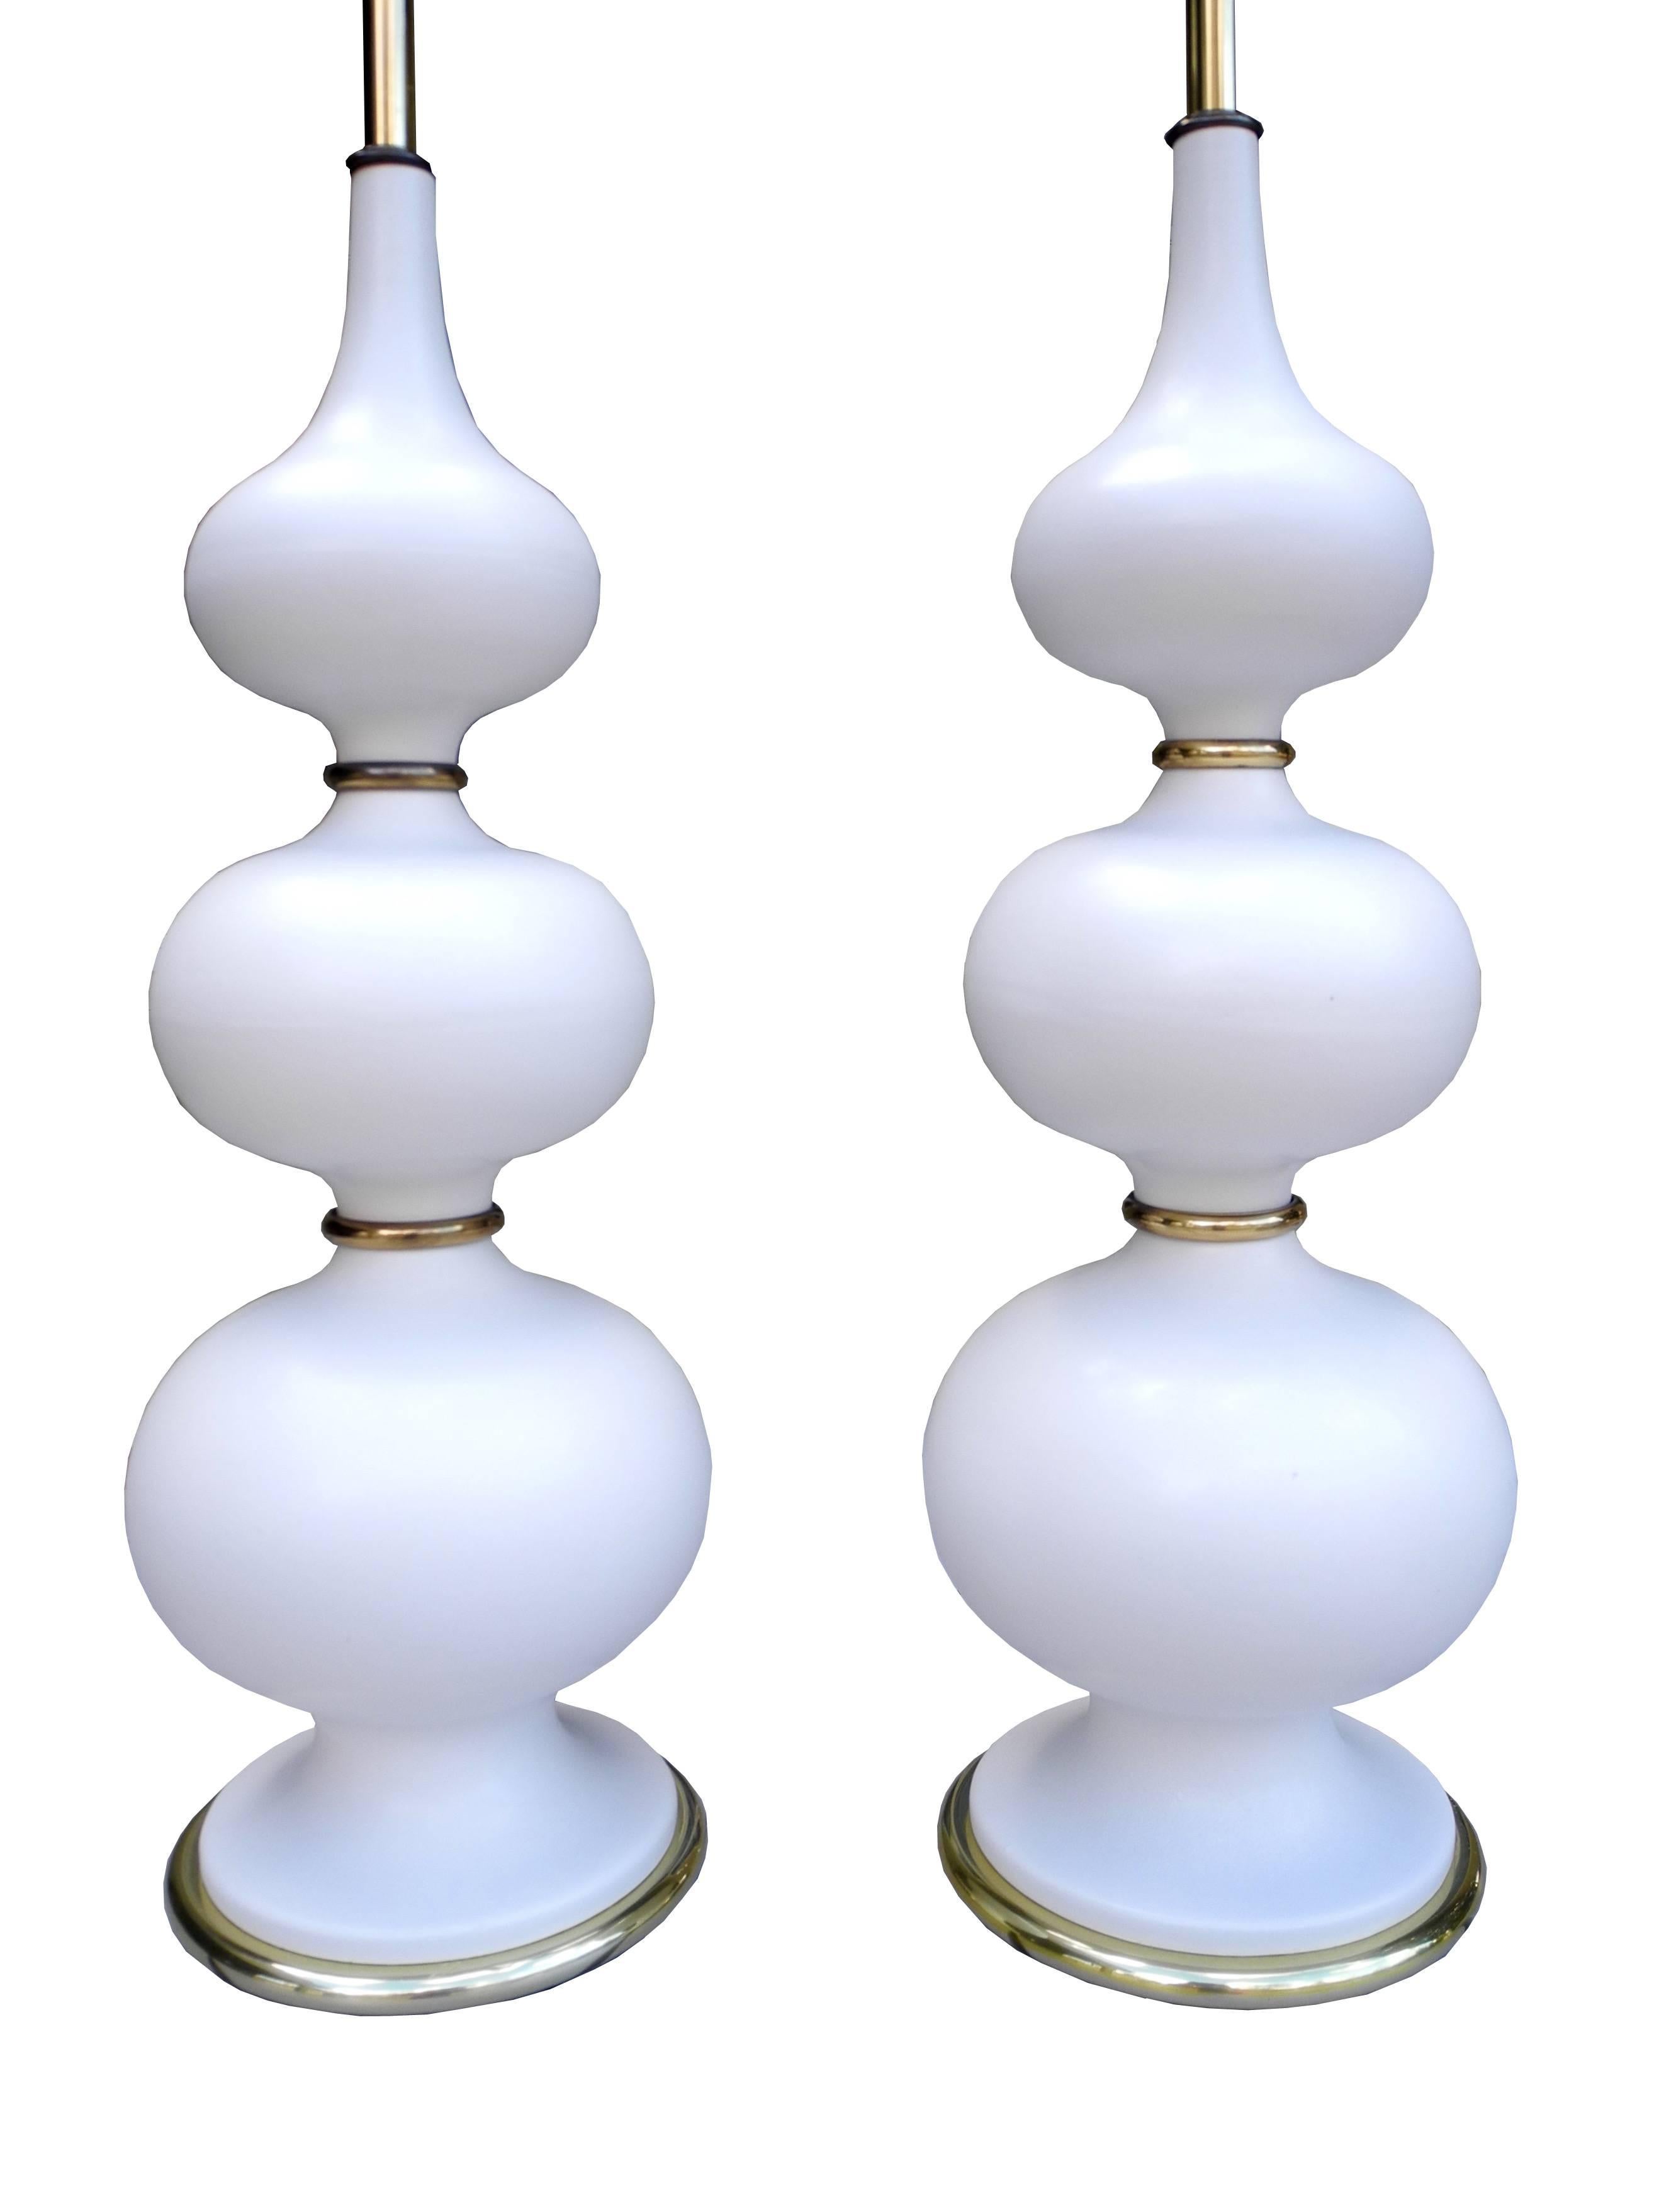 These Thurston ceramics lamps have a strong stance in any room. The top of the sockets measures 26" tall. The top of the finial measures 39". The top of the ceramic is 21". They are in great original condition.